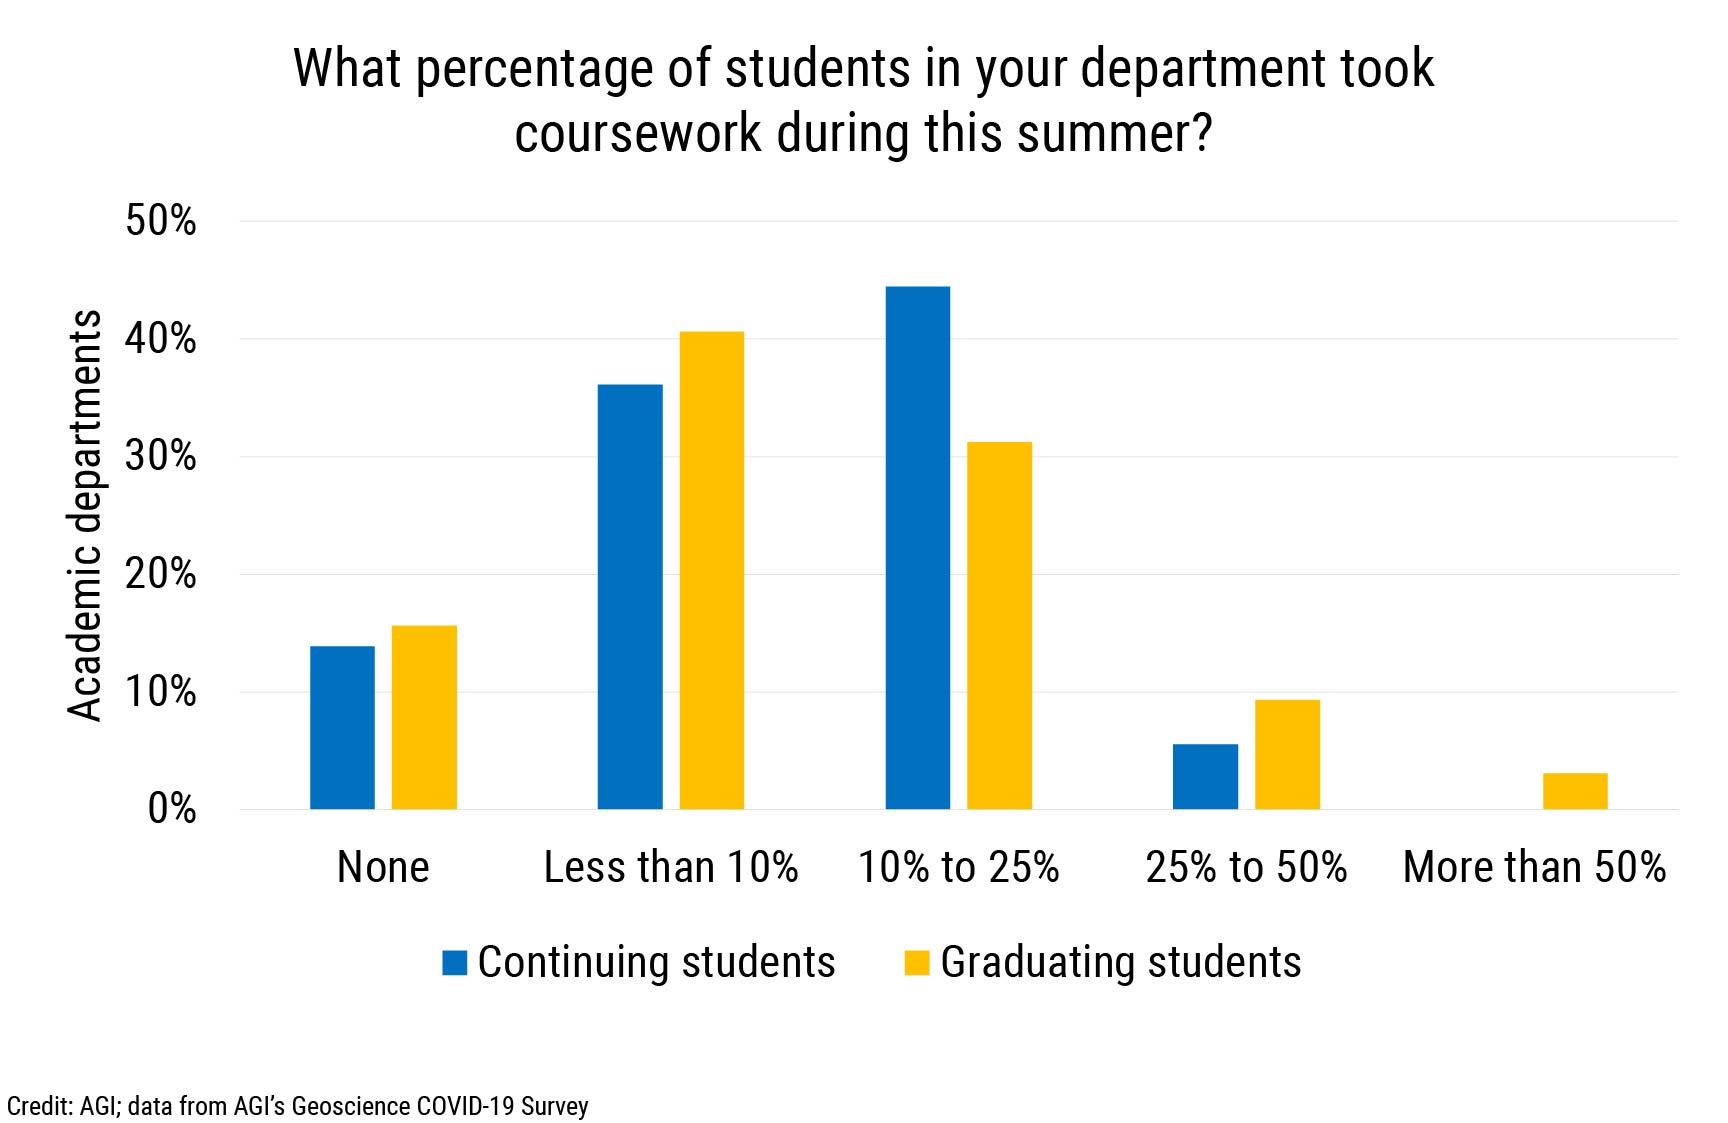 DB_2021-032 chart 05: What percentage of students in your department took coursework this summer? (Credit: AGI; data from AGI's Geoscience COVID-19 Survey)